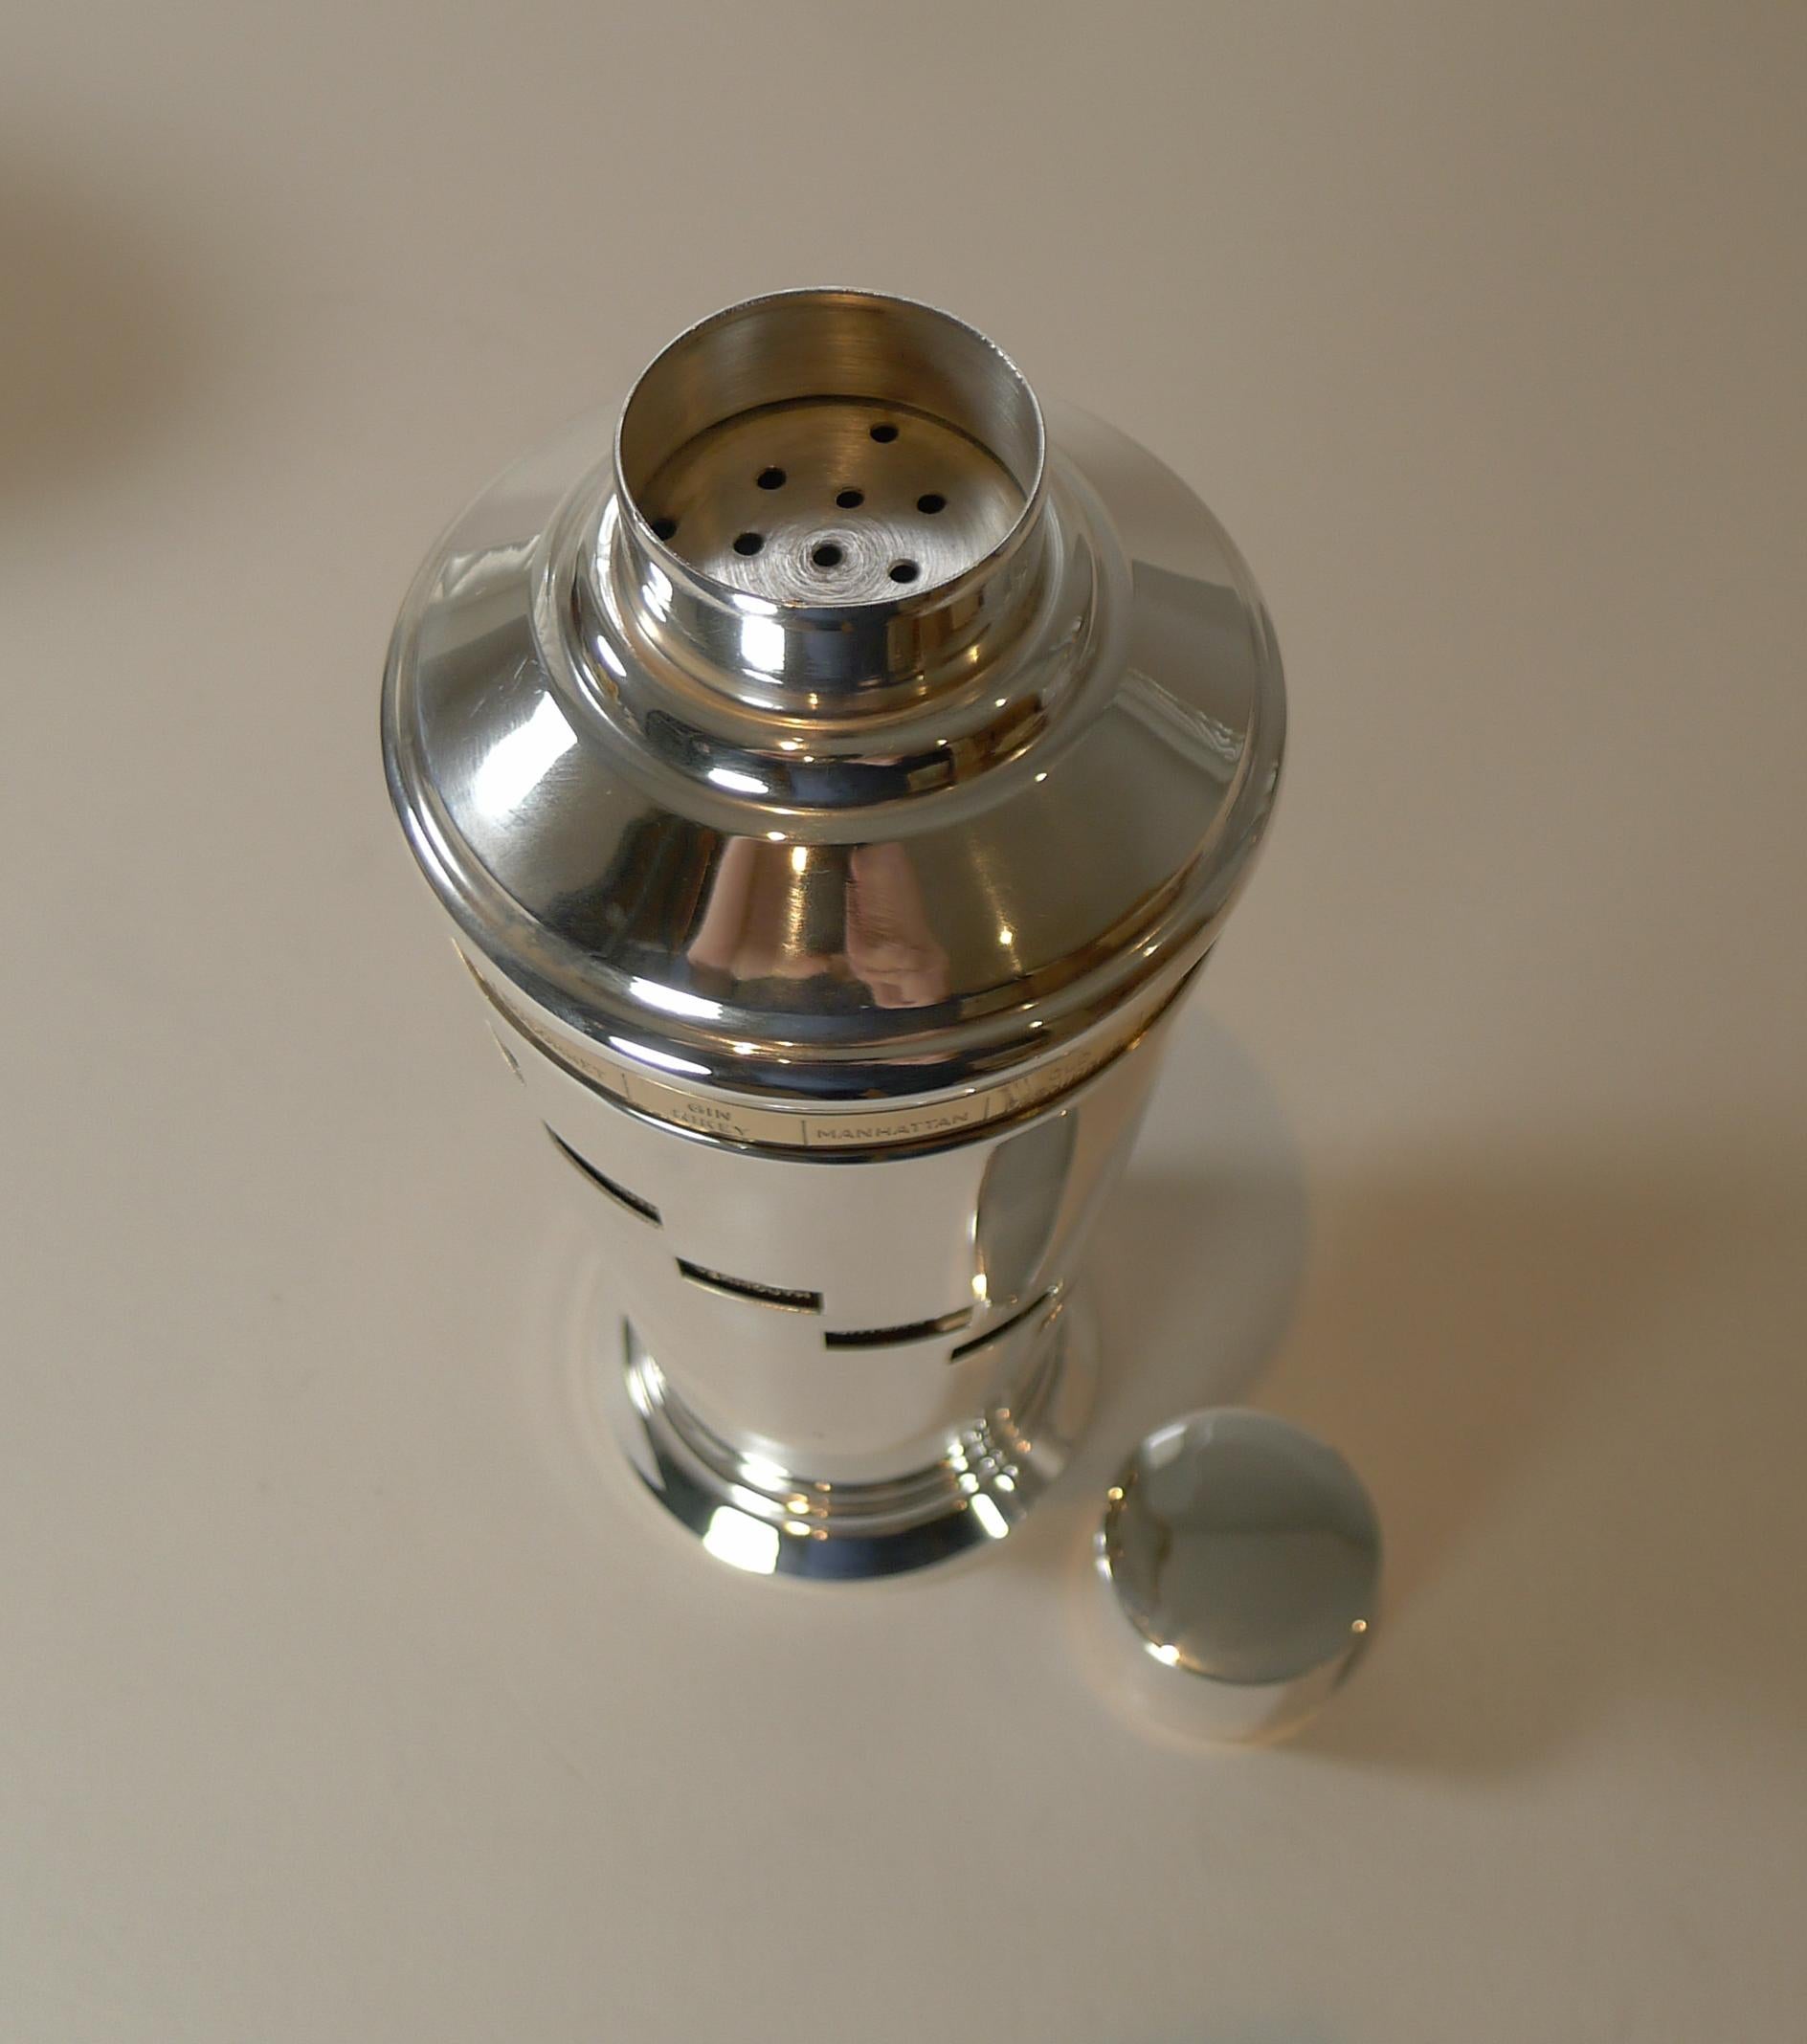 Mid-20th Century Large Italian Art Deco Silver & Gold Plated Menu / Recipe Cocktail Shaker